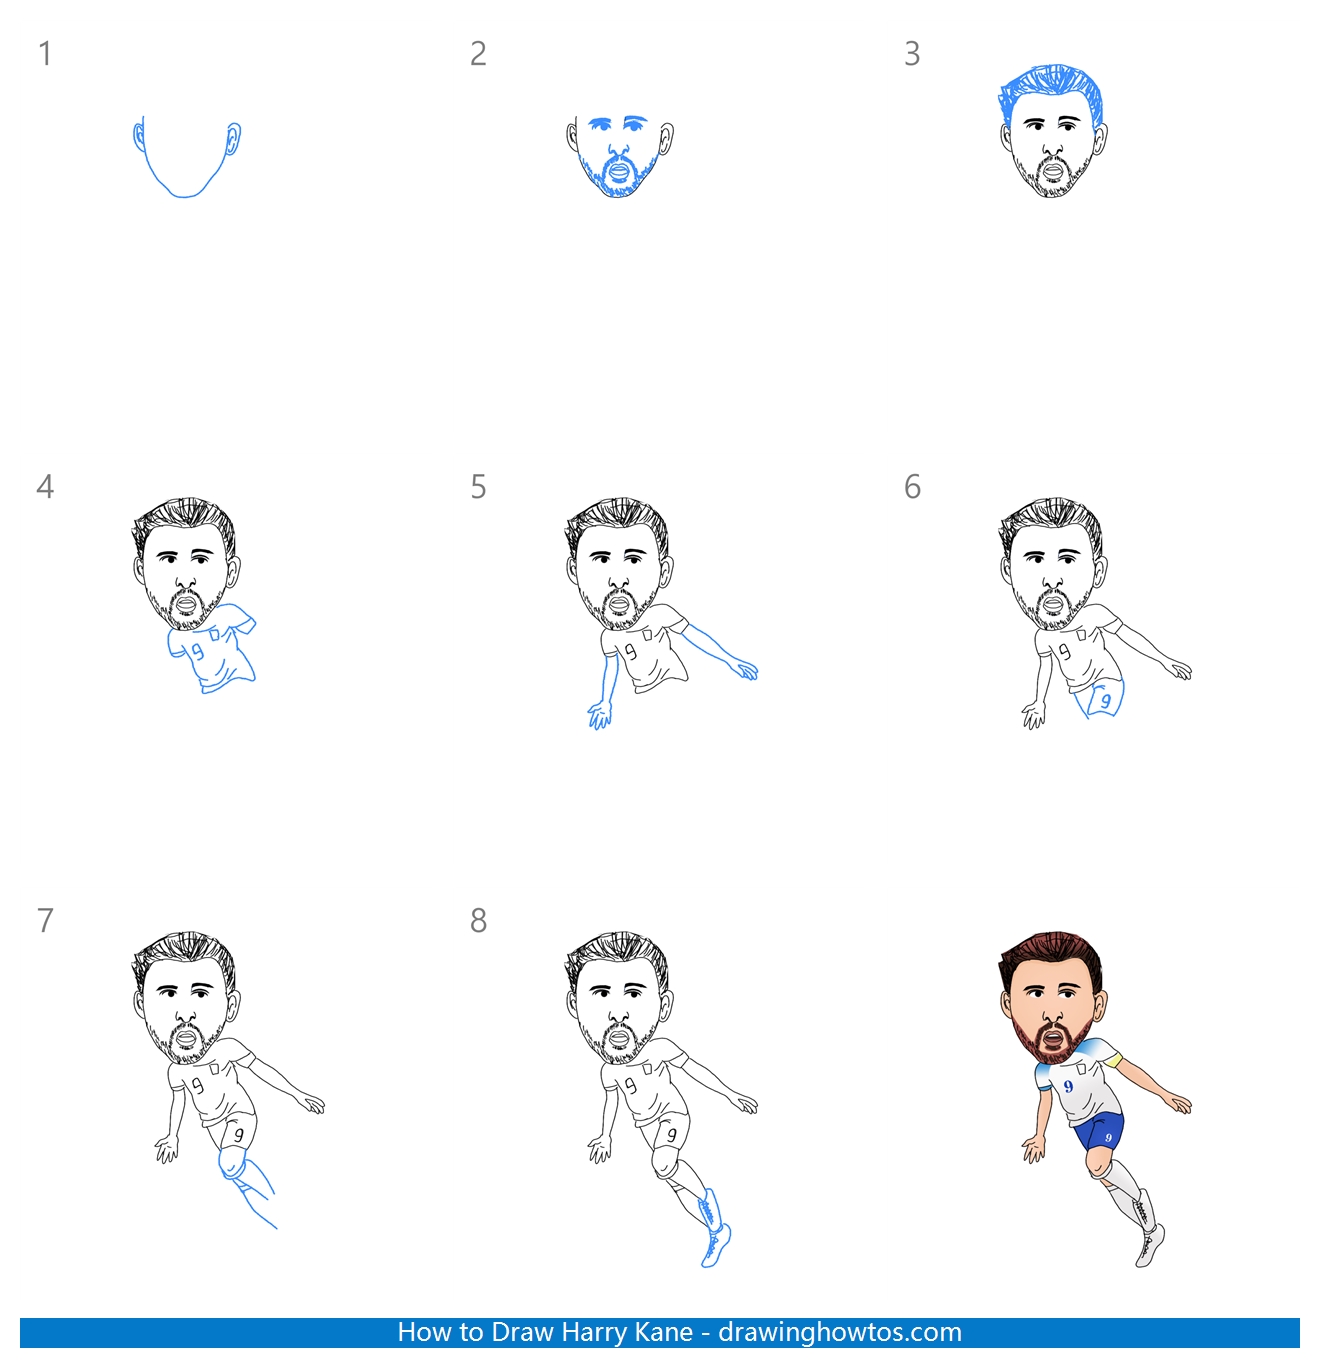 How to Draw Harry Kane Step by Step